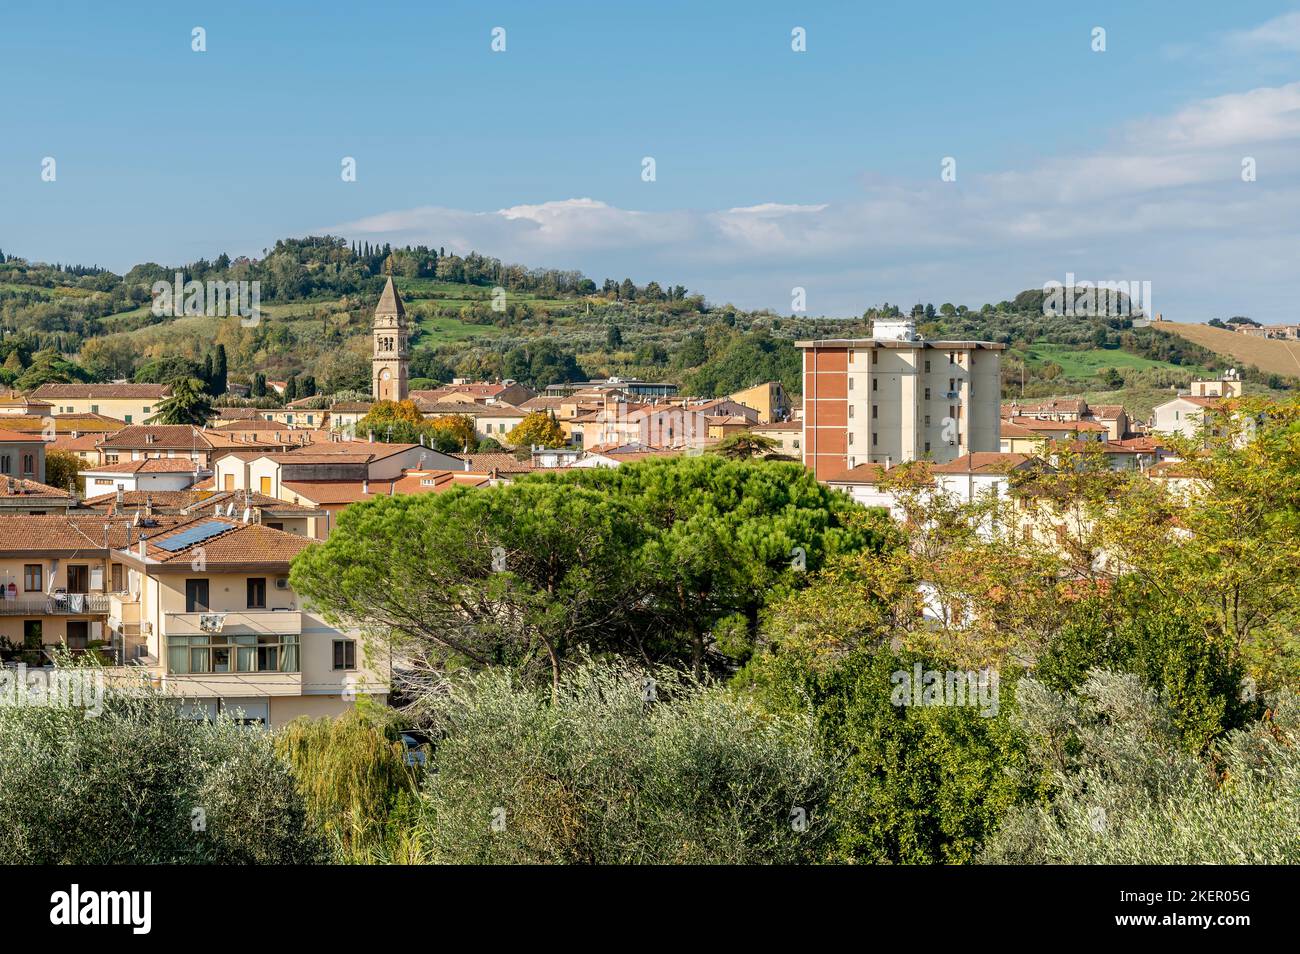 Panoramic view of Casciana Terme, Pisa, Italy, on a sunny day Stock Photo